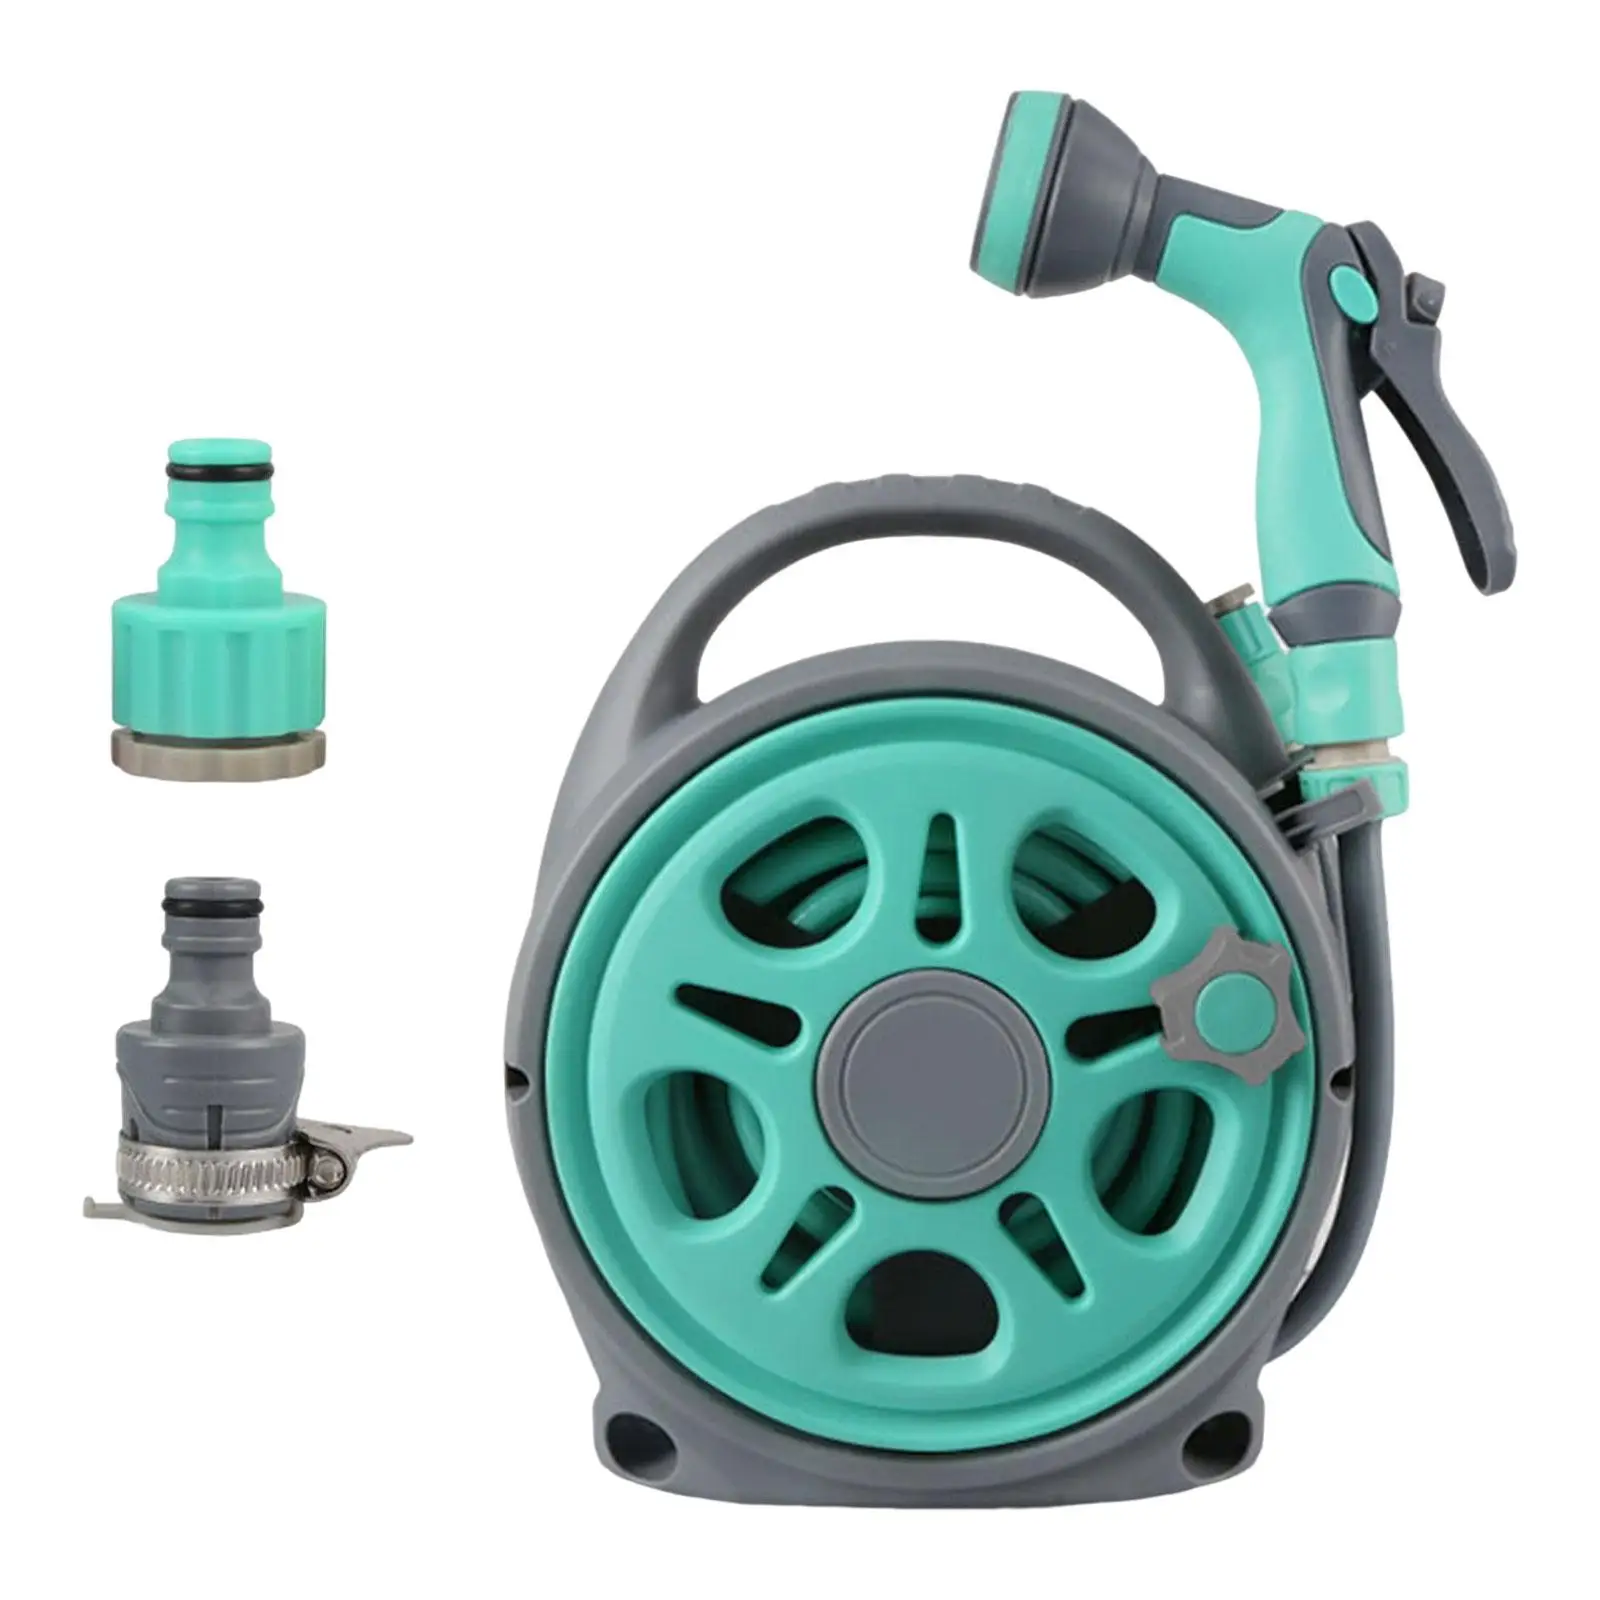 Portable Garden Hose Reel 7 Function Nozzle 16M Rolling Hose Reel for Car Washing Watering Flowers Showering Pets Cleaning